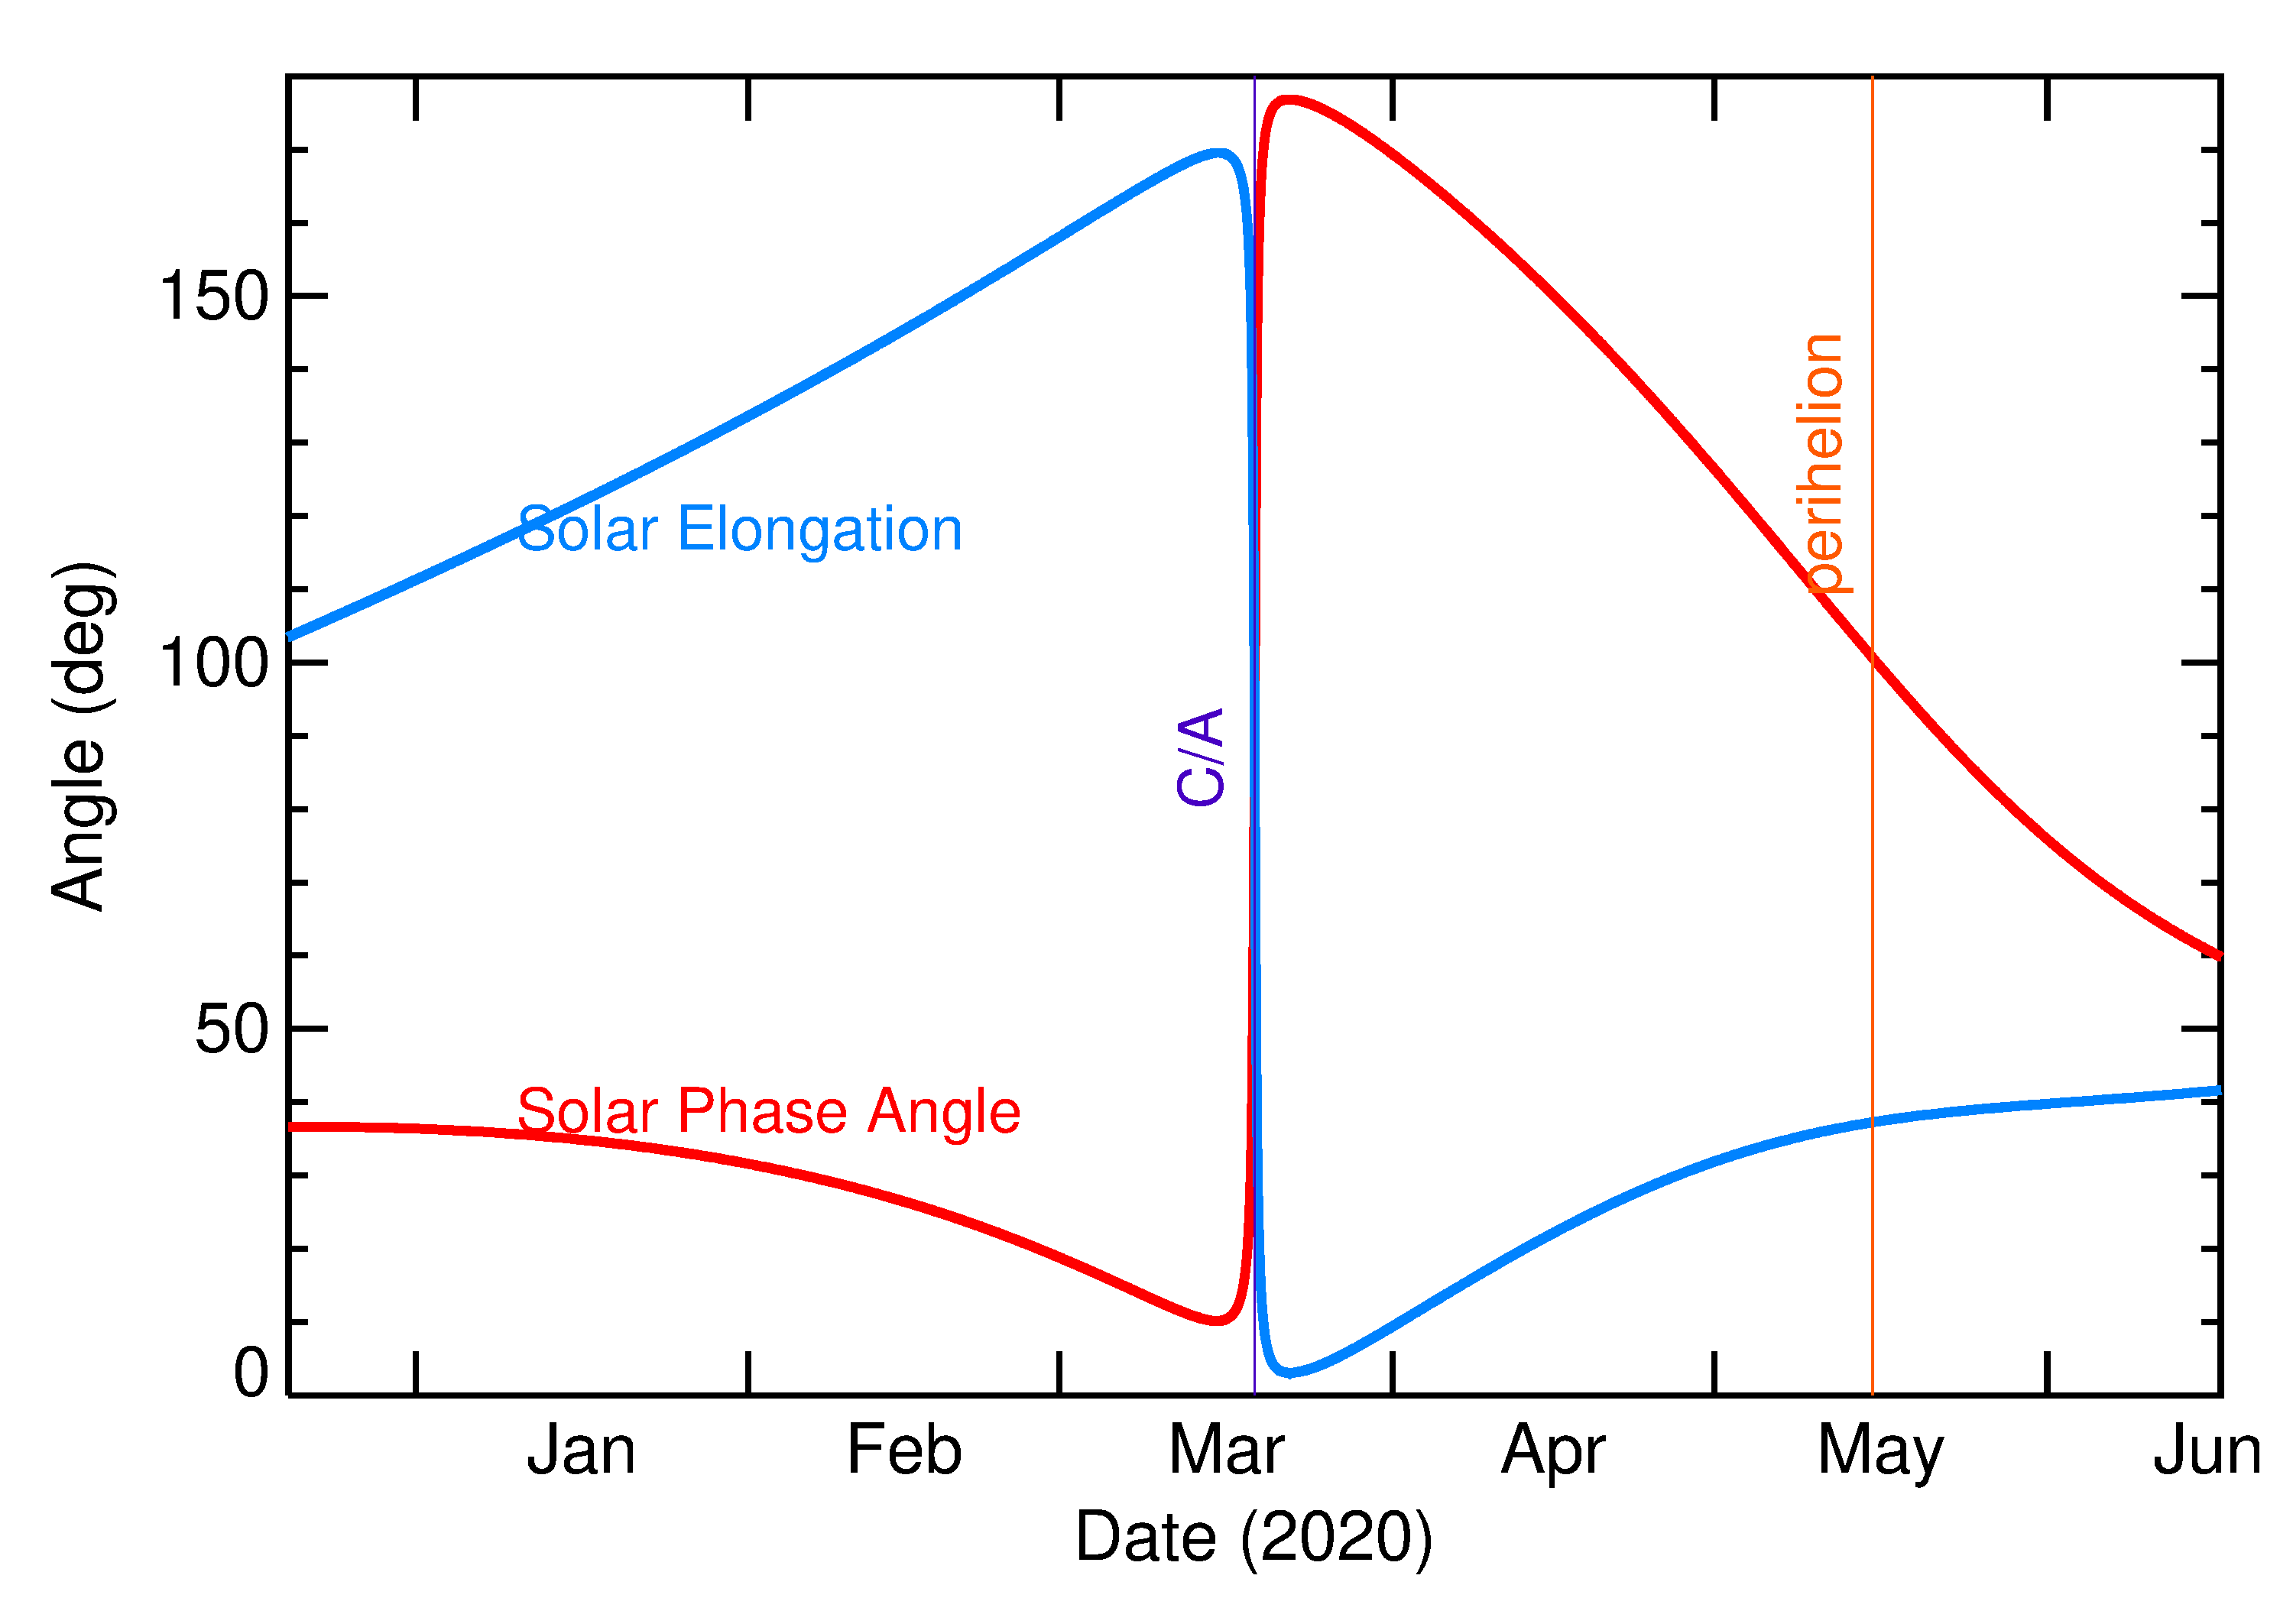 Solar Elongation and Solar Phase Angle of 2020 FD in the months around closest approach